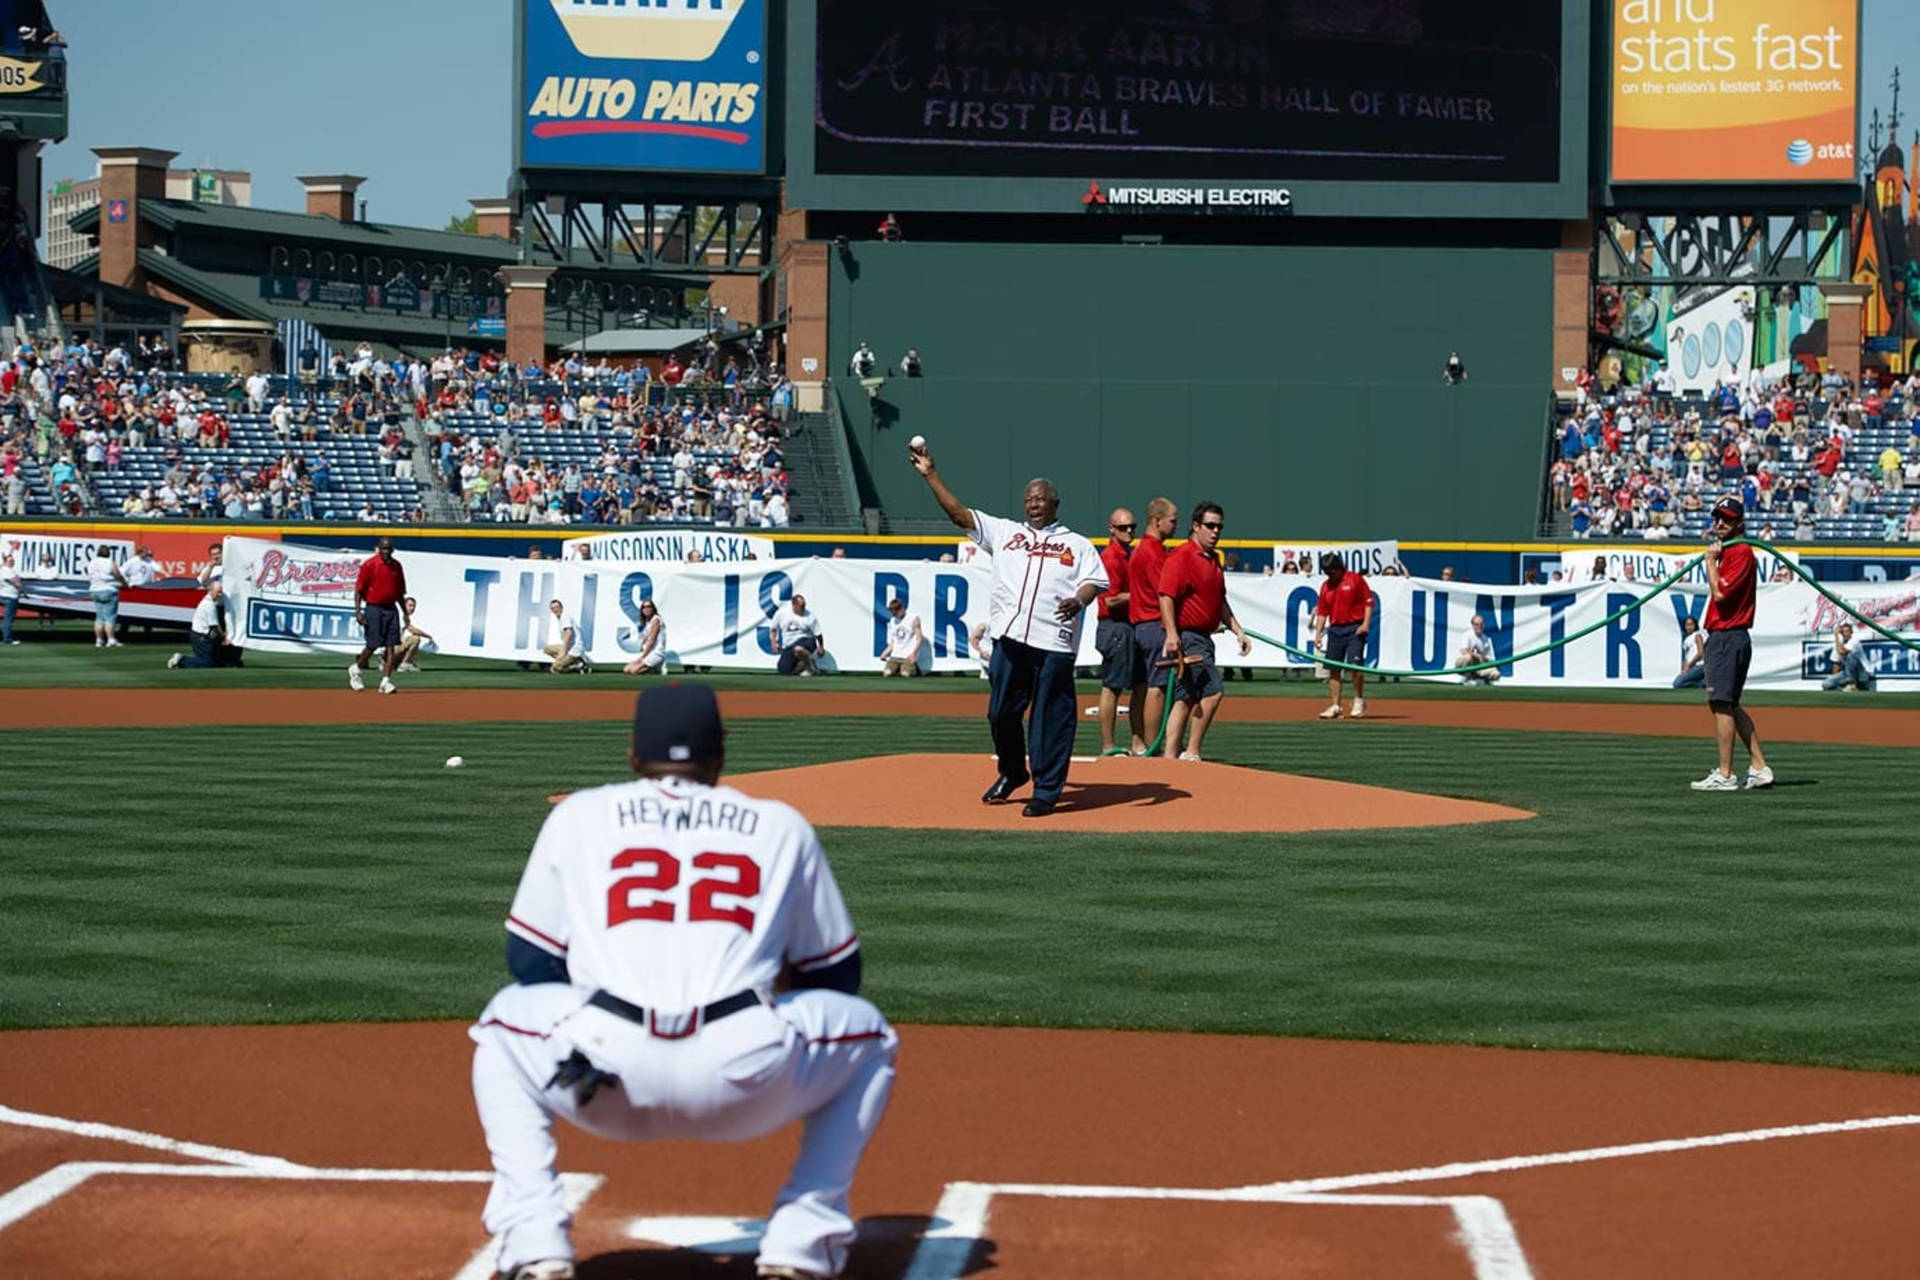 Hank Aaron Ceremonial First Pitch Background